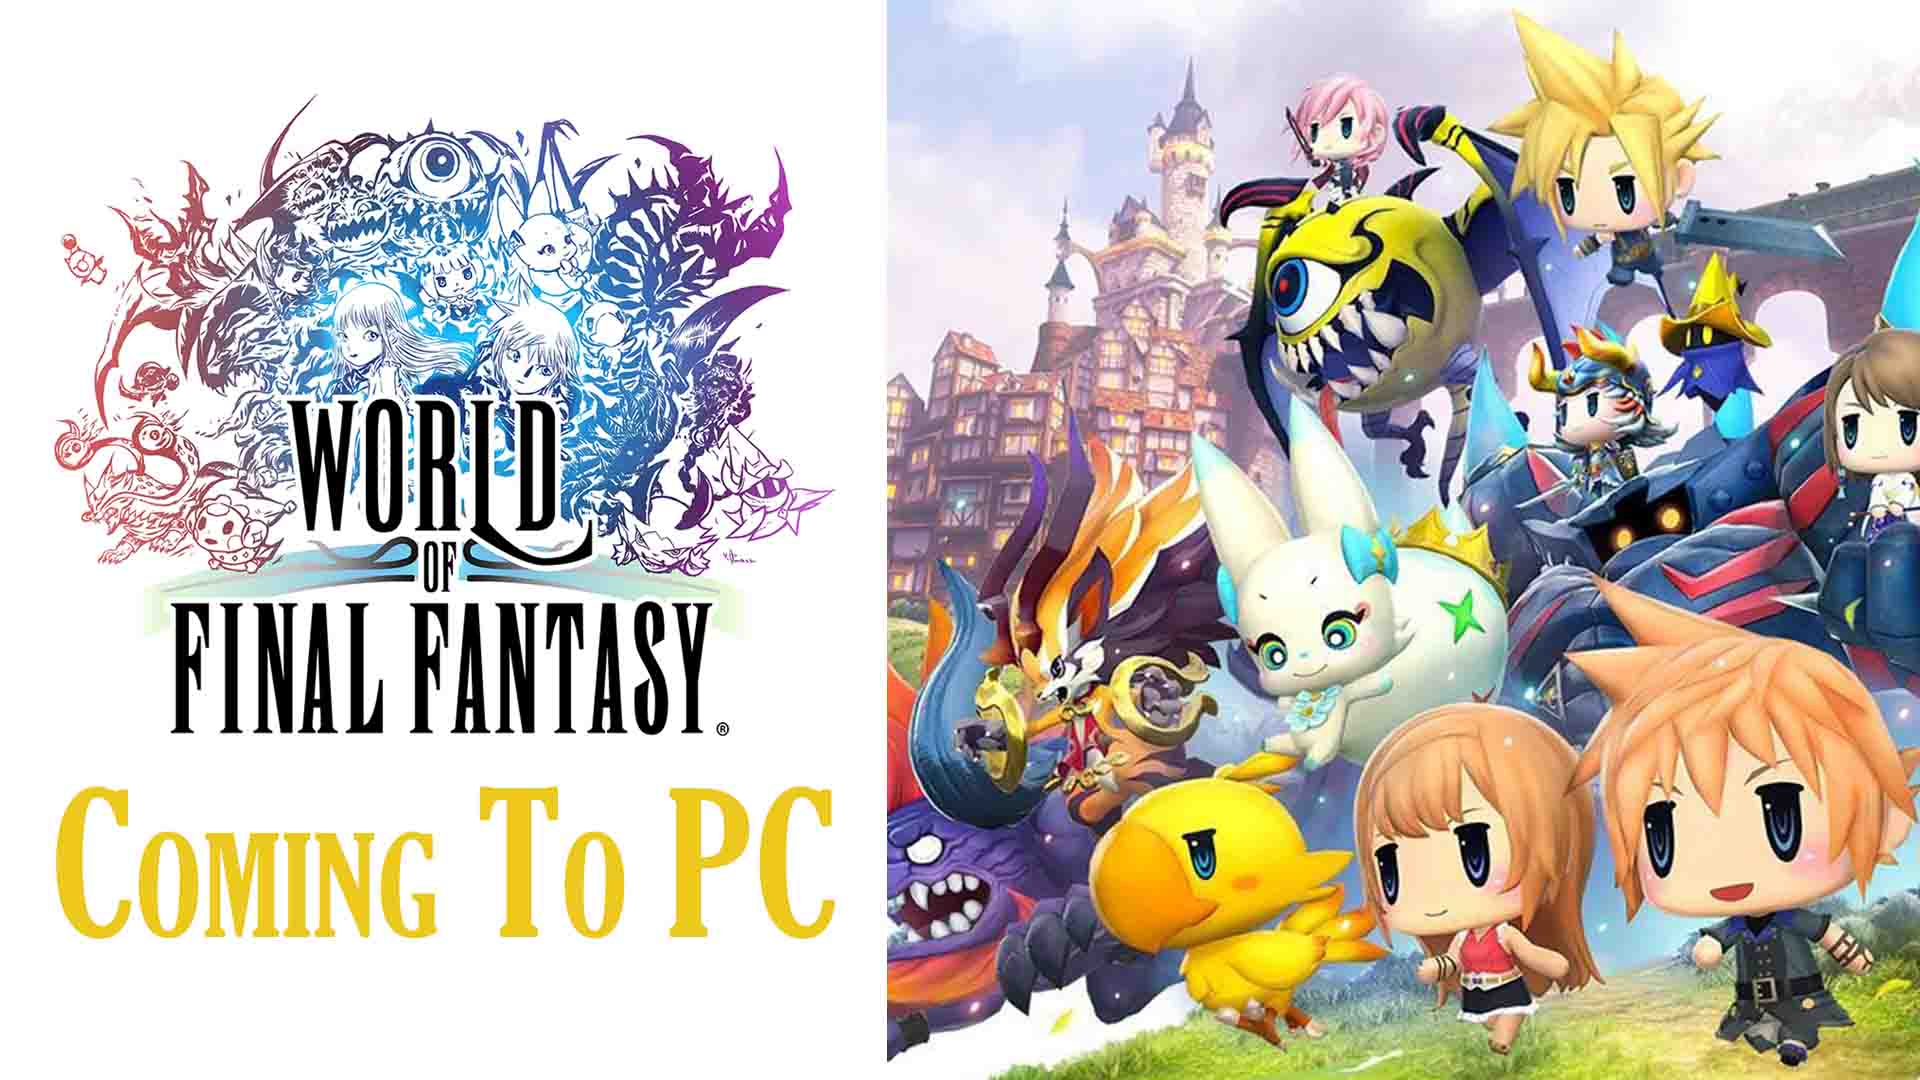 World of Final Fantasy Coming To PC! - Fextralife